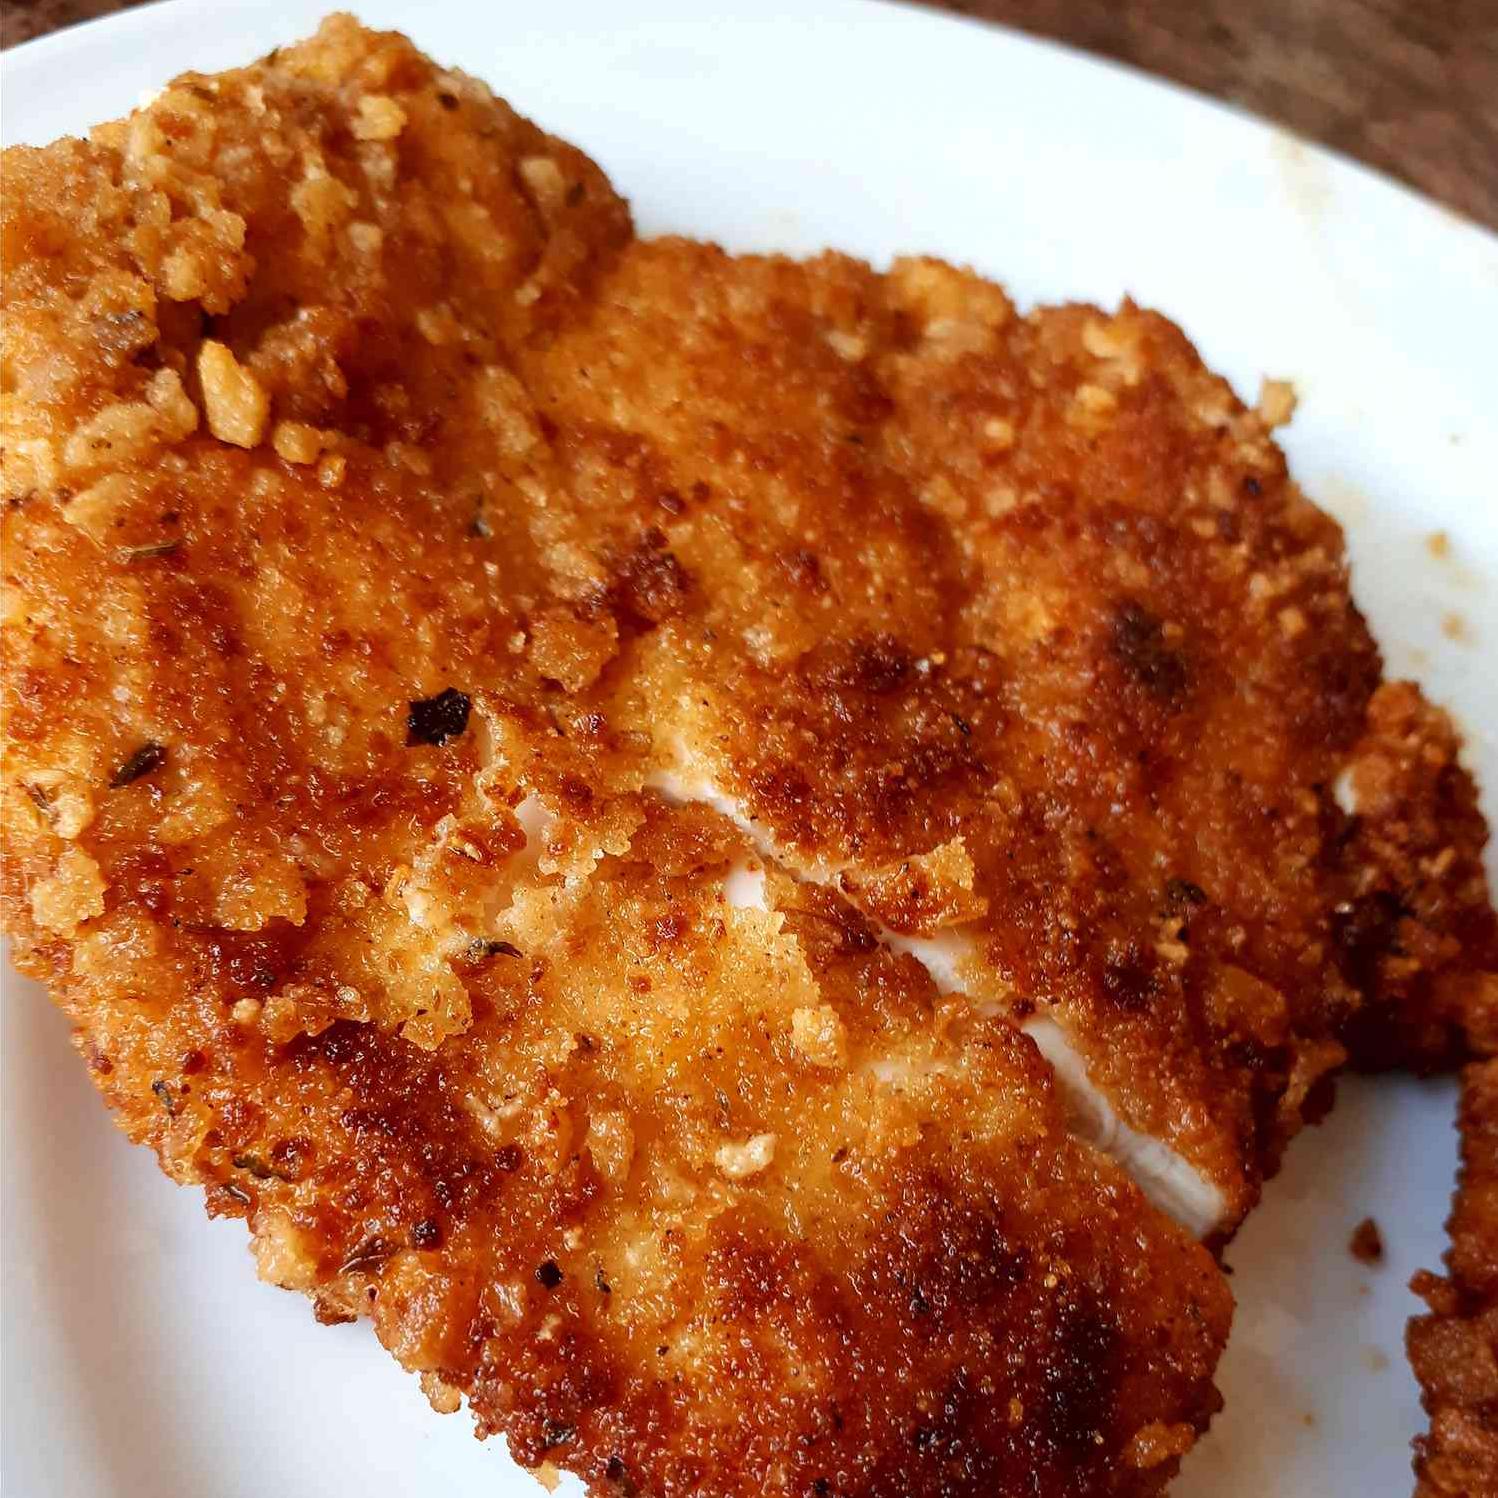  I bet you can't resist that crispy coating and juicy chicken